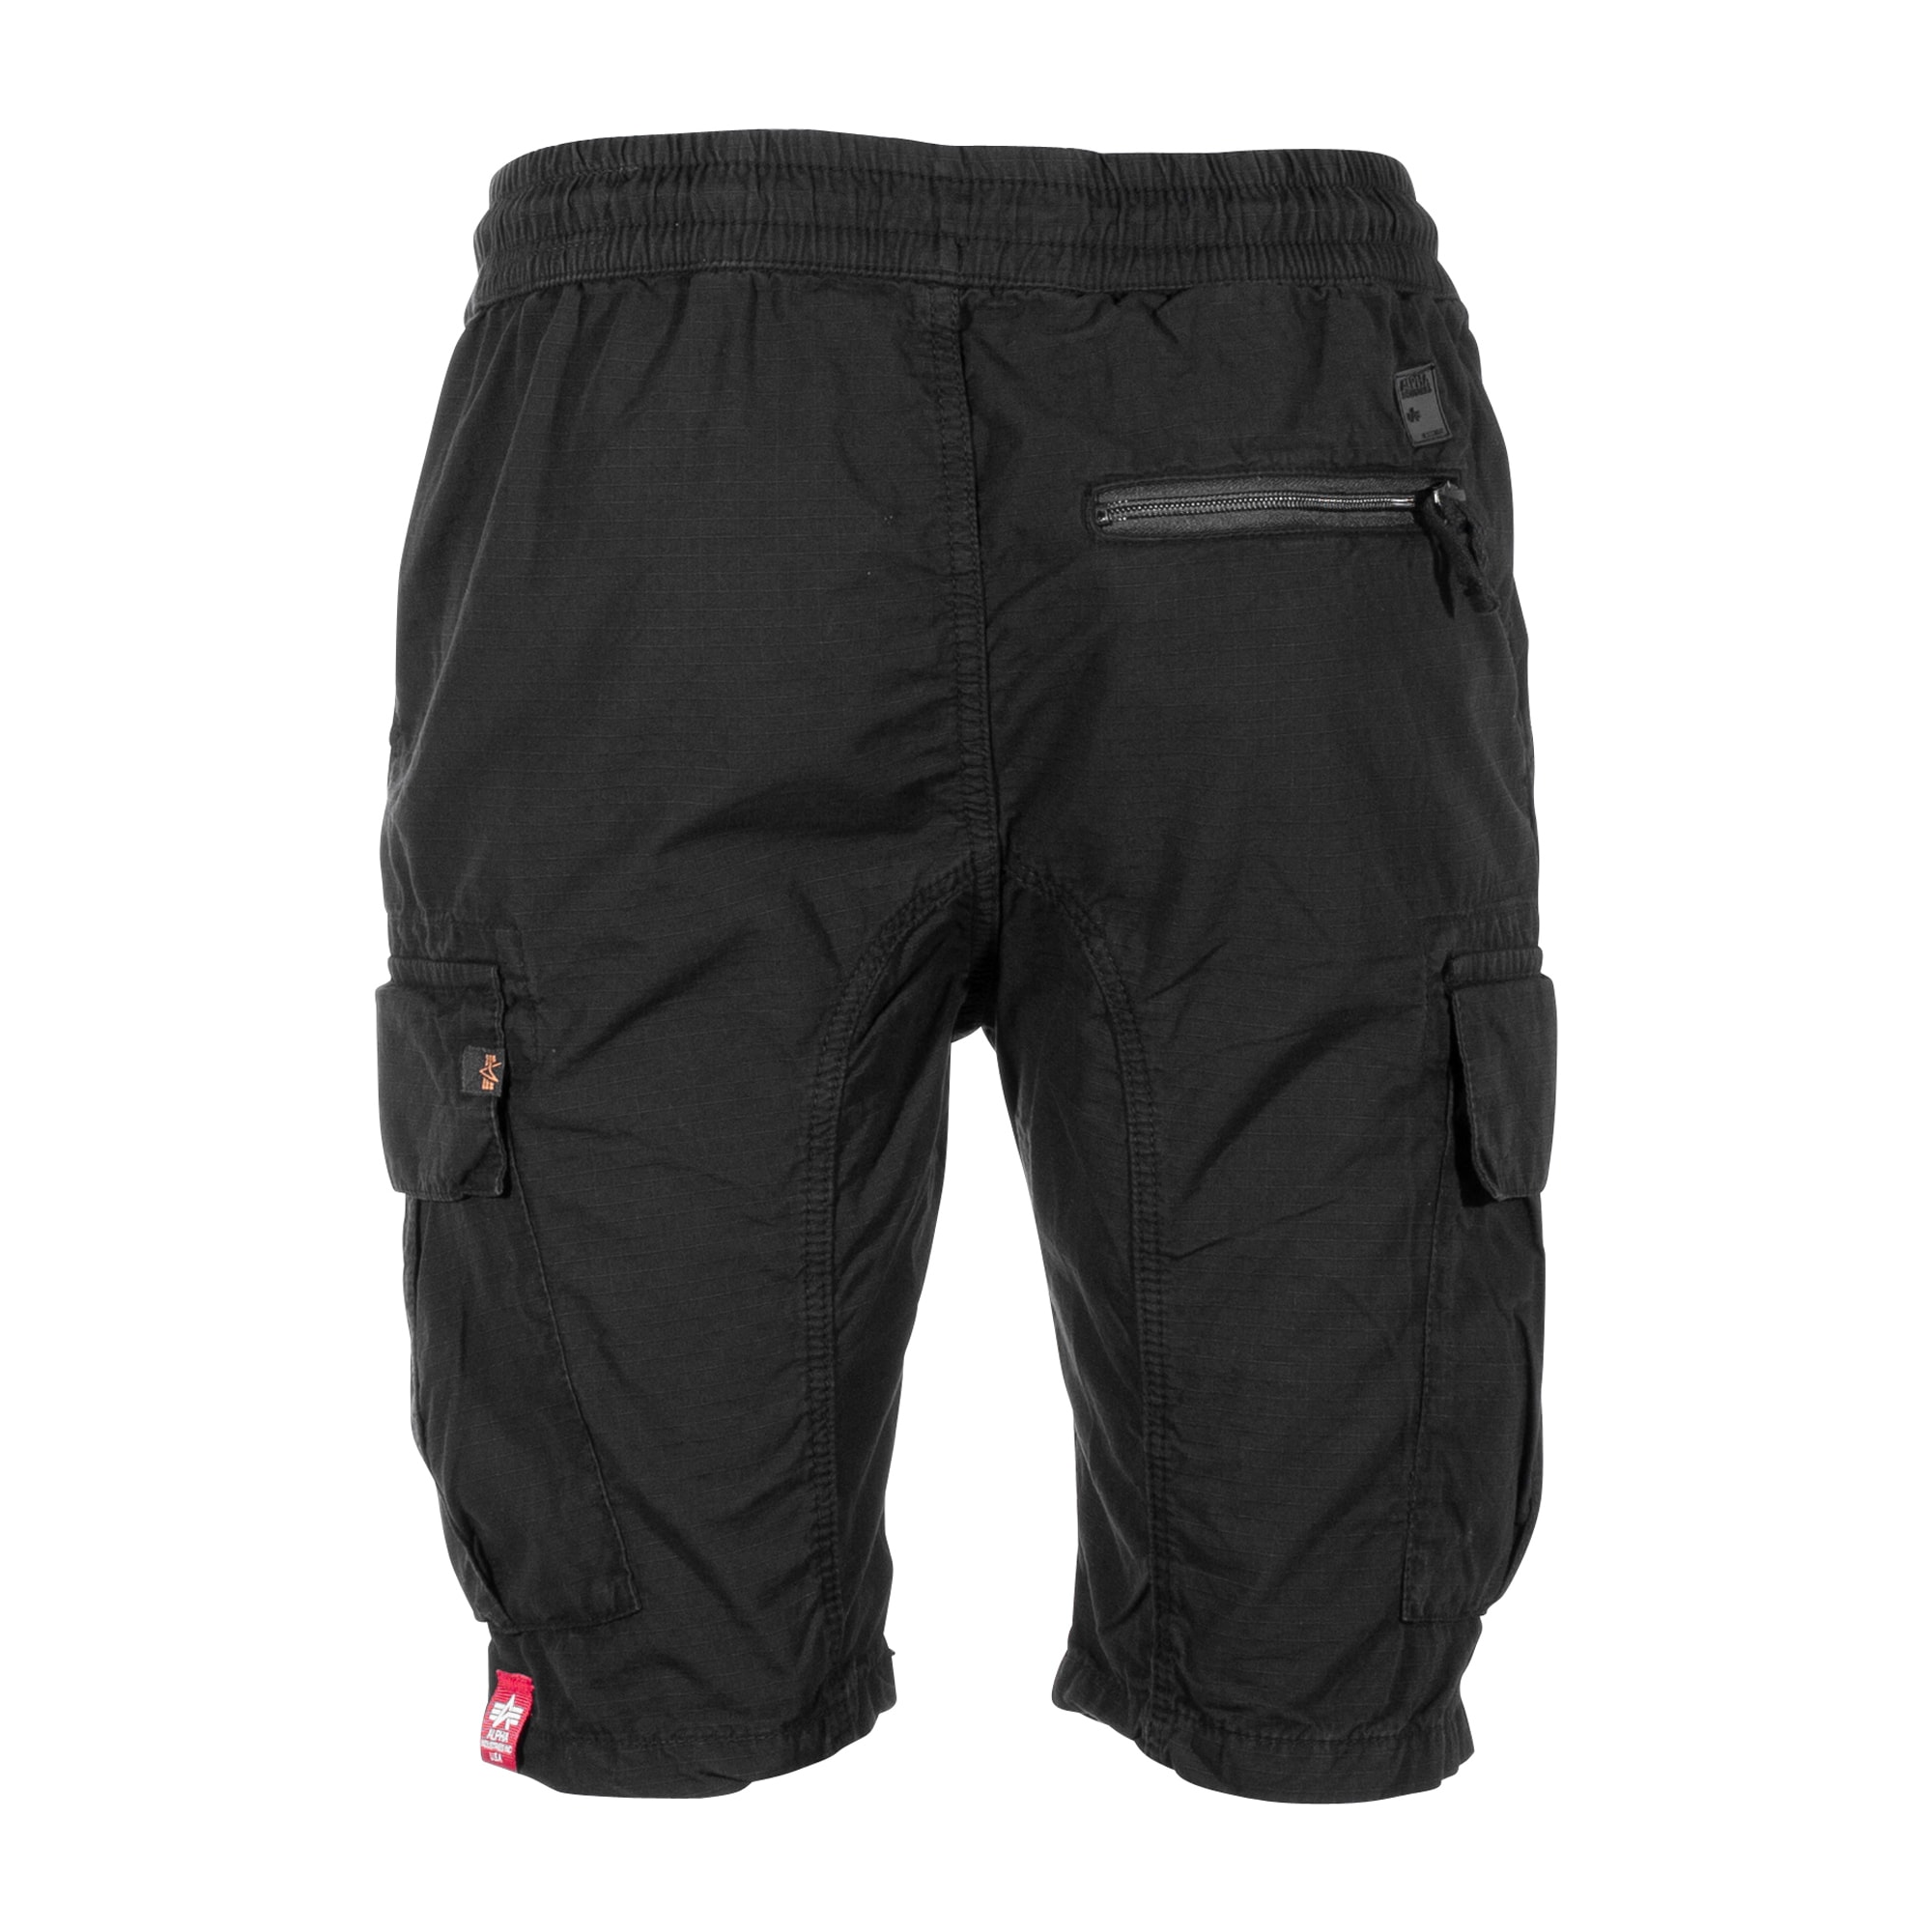 Alpha Short black Industries by the Purchase Jogger ASMC Ripstop